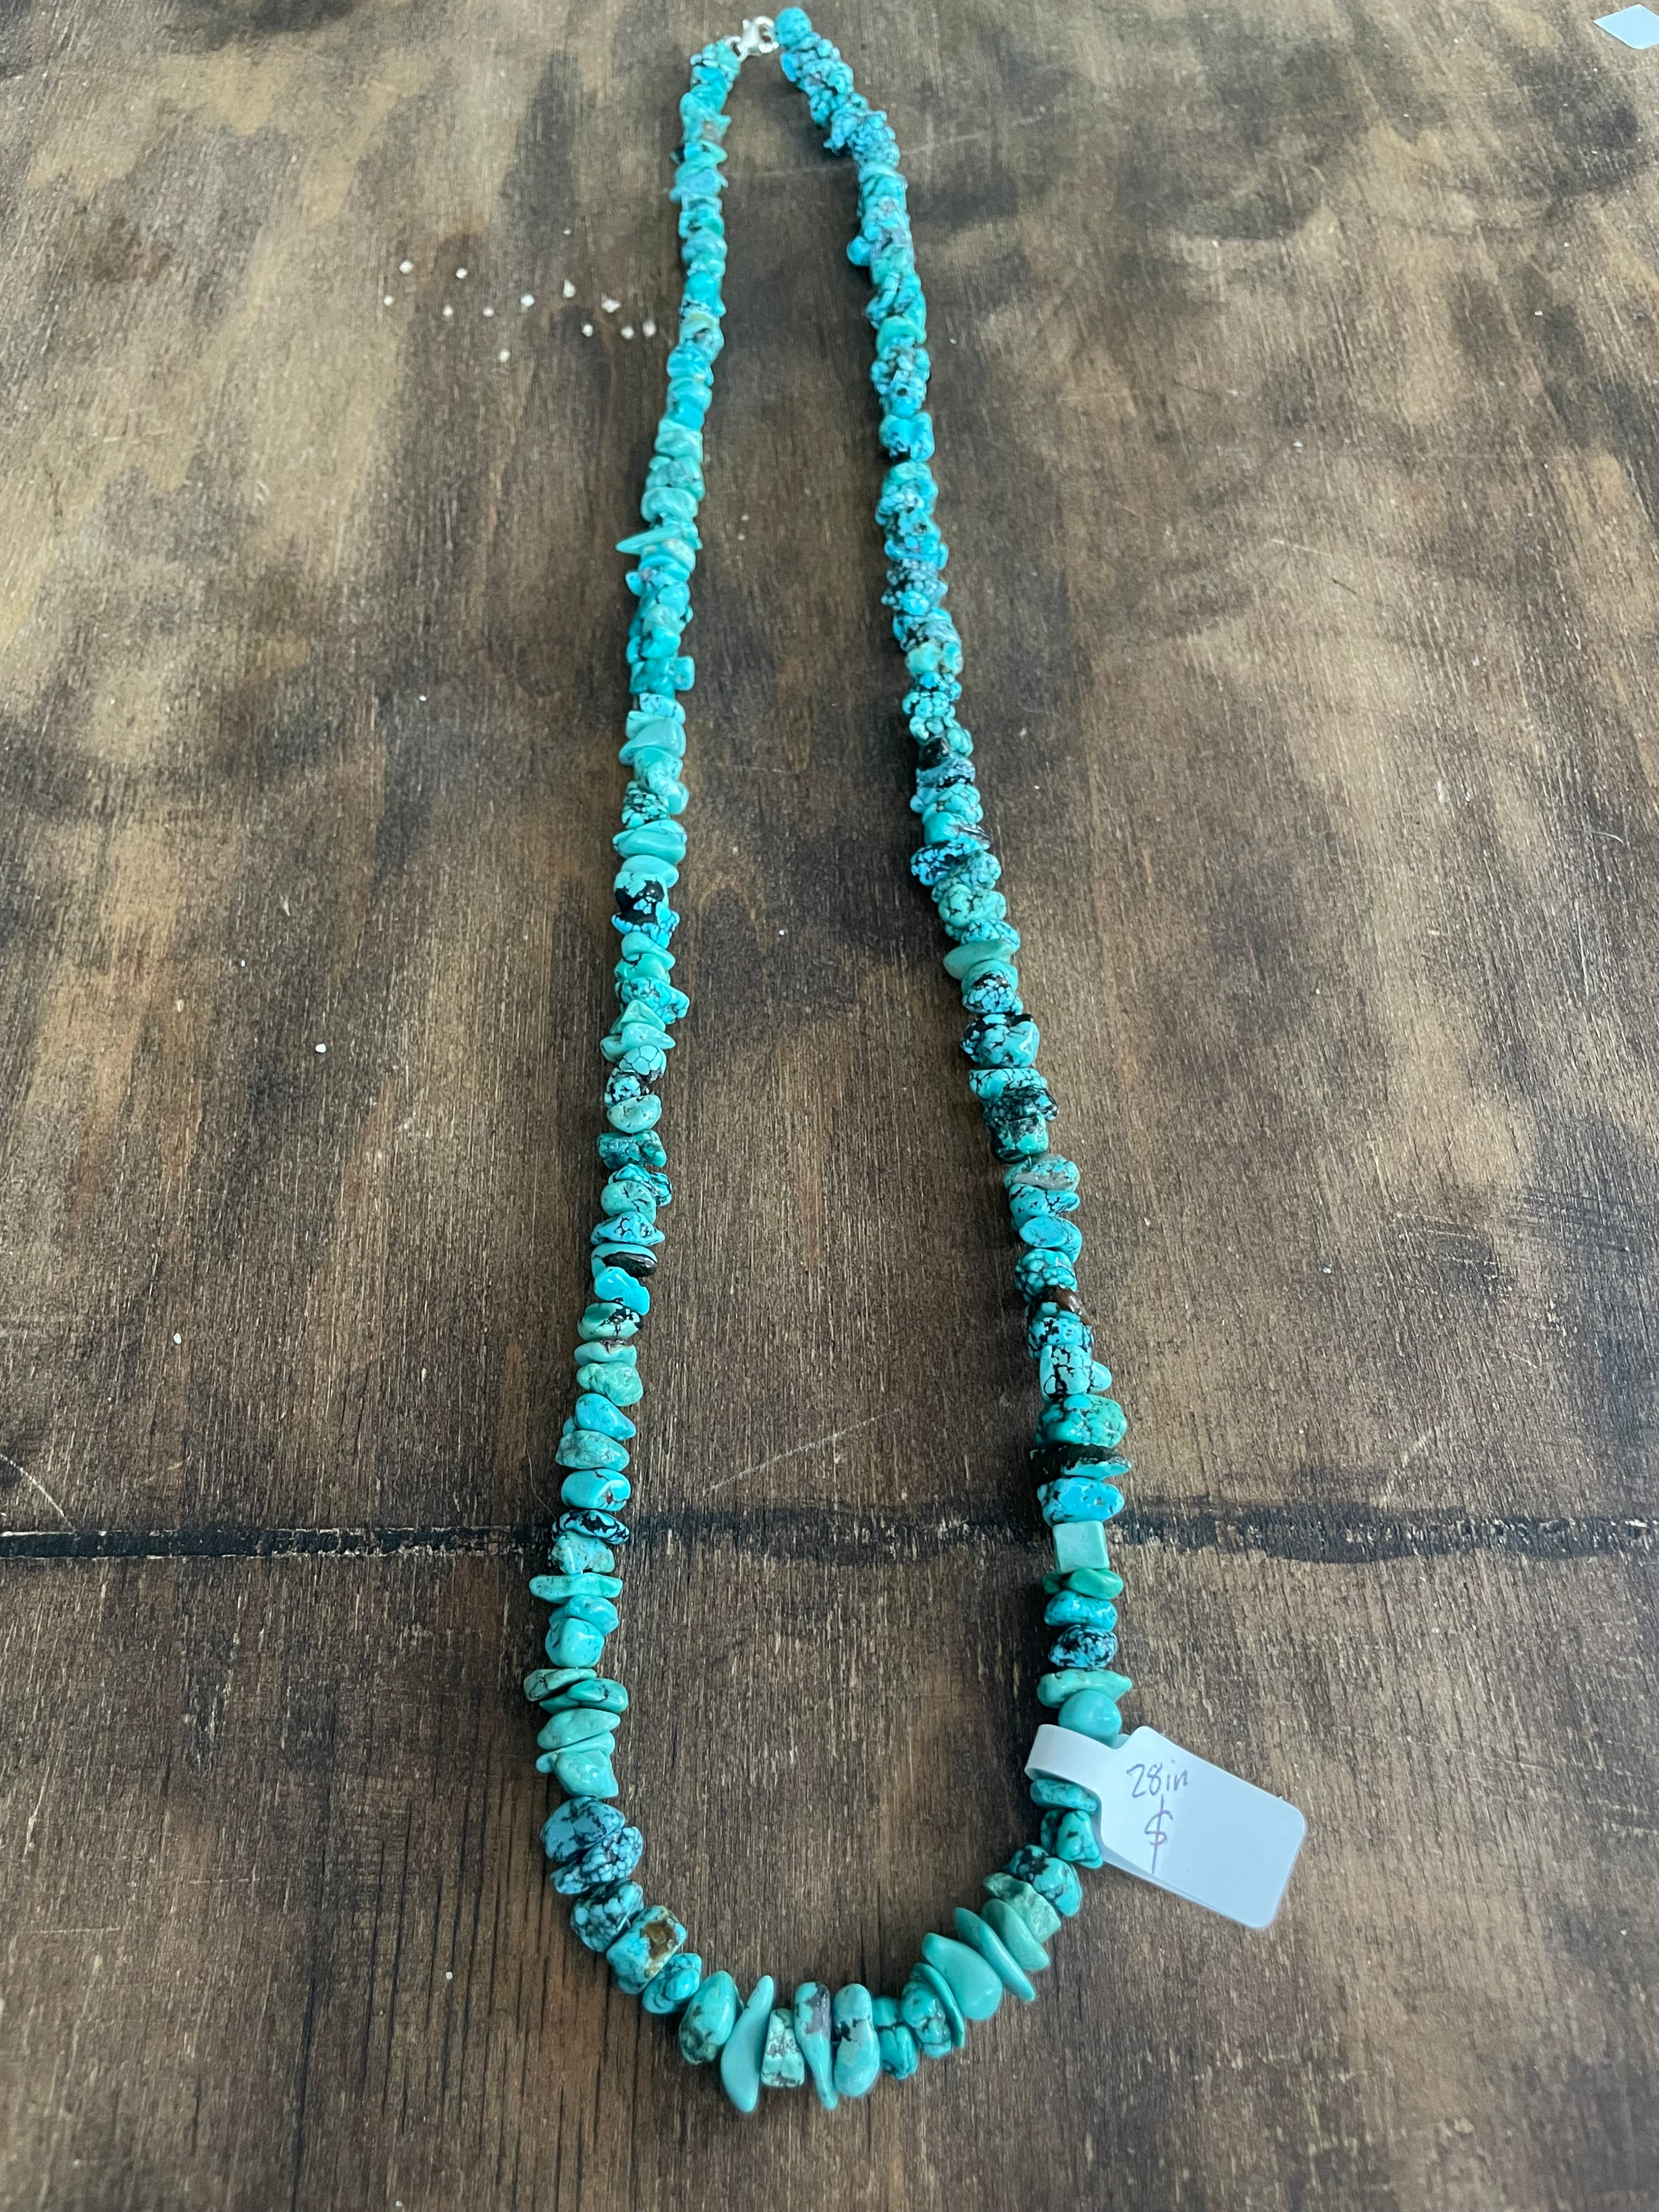 28in Stabilized Turquoise Necklace